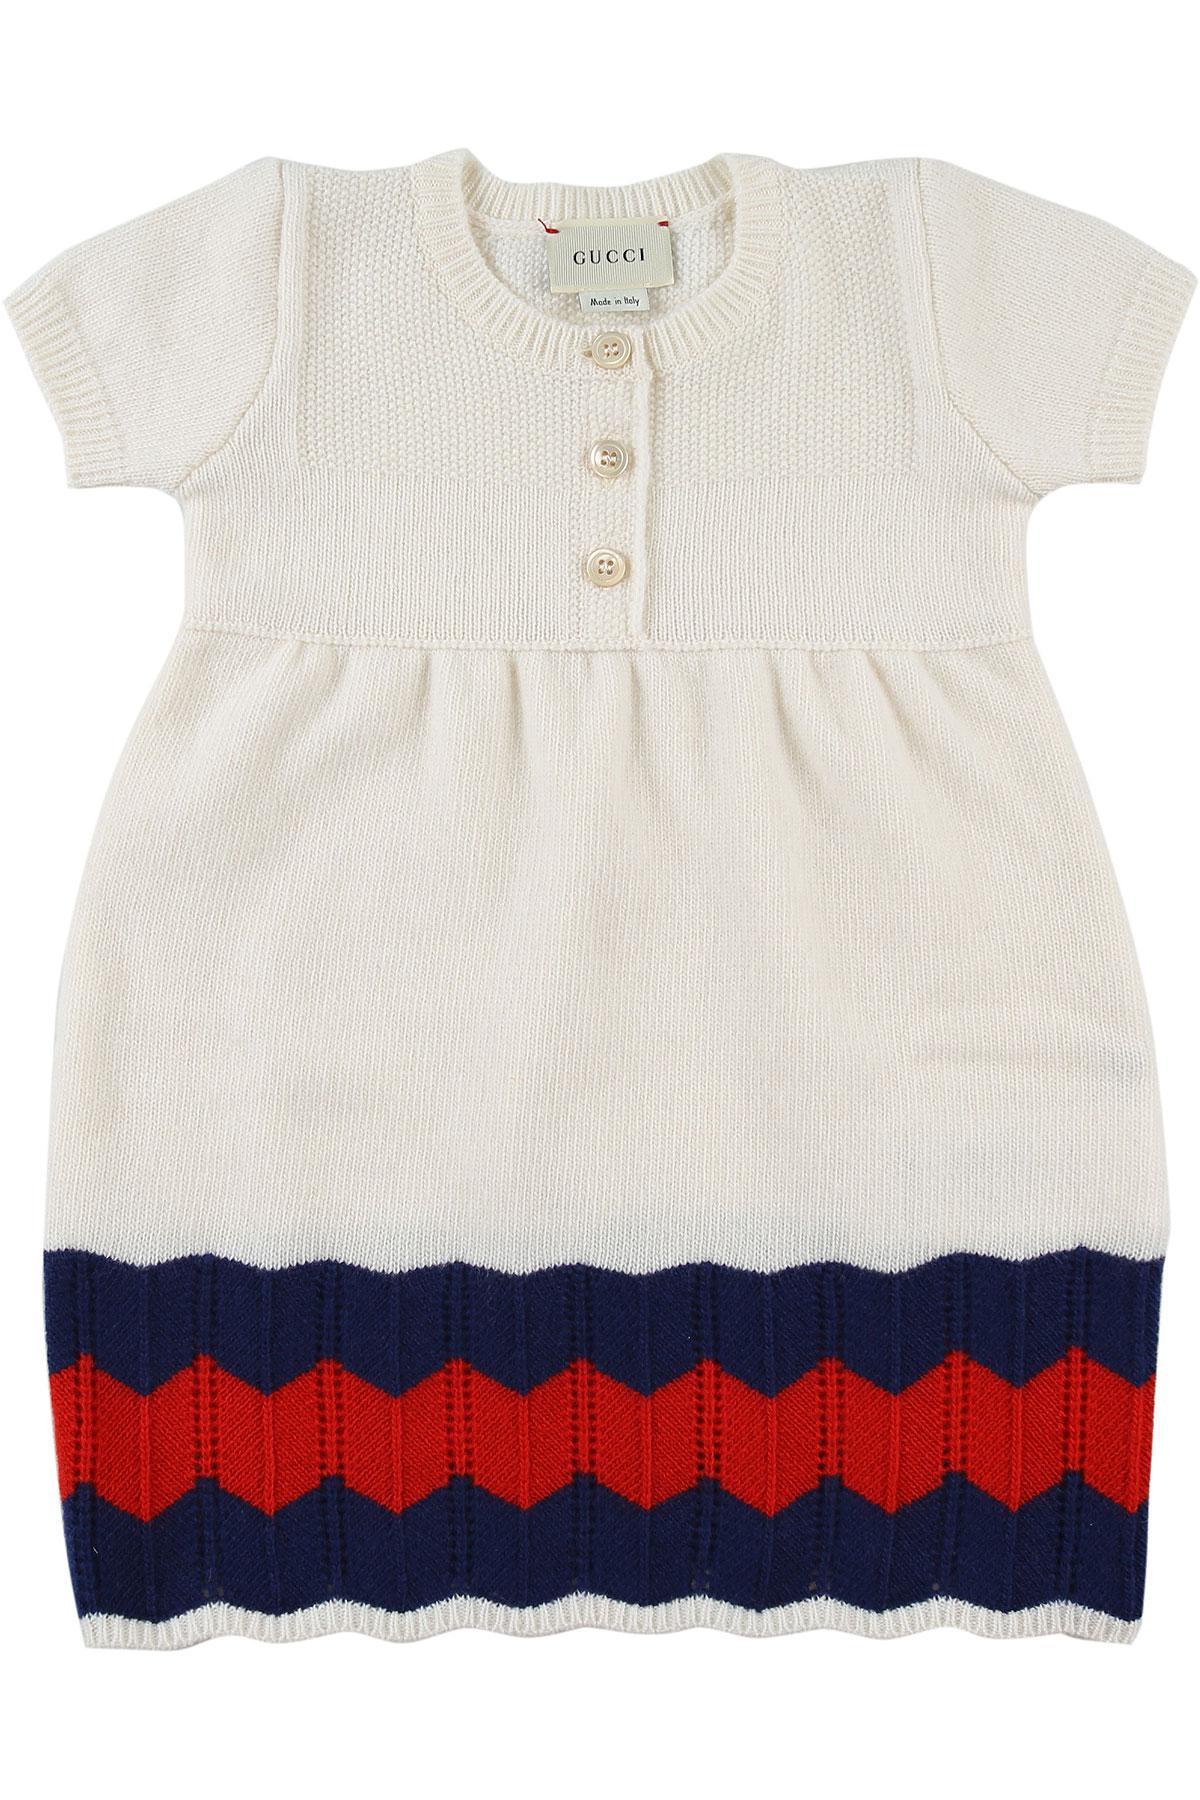 Gucci Baby Dress For Girls On Sale in 